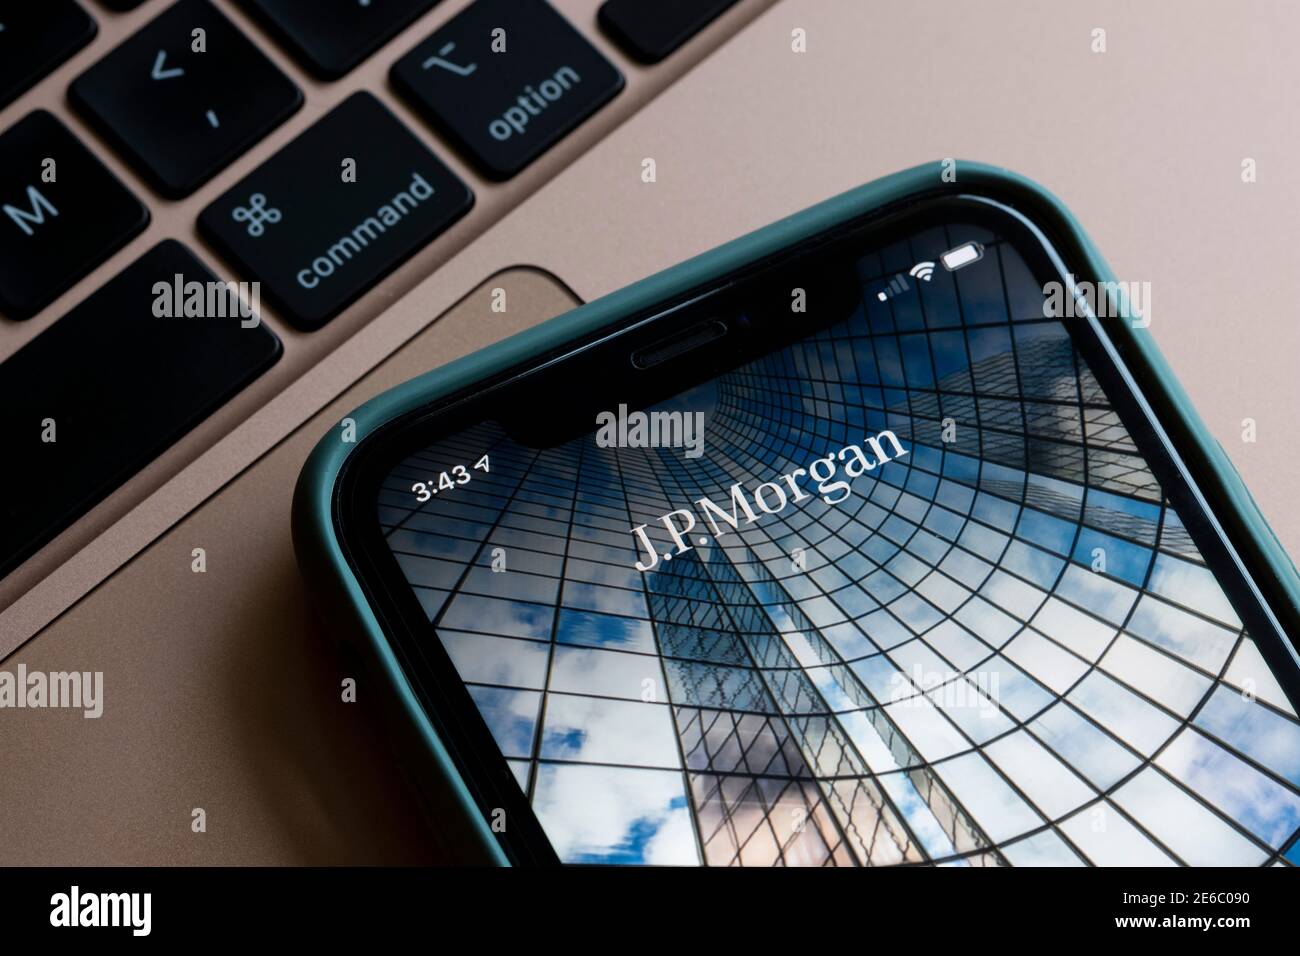 Closeup of the J.P. Morgan logo seen on the J.P. Morgan mobile app welcome screen on an iPhone. J.P. Morgan is a global financial services corporation. Stock Photo